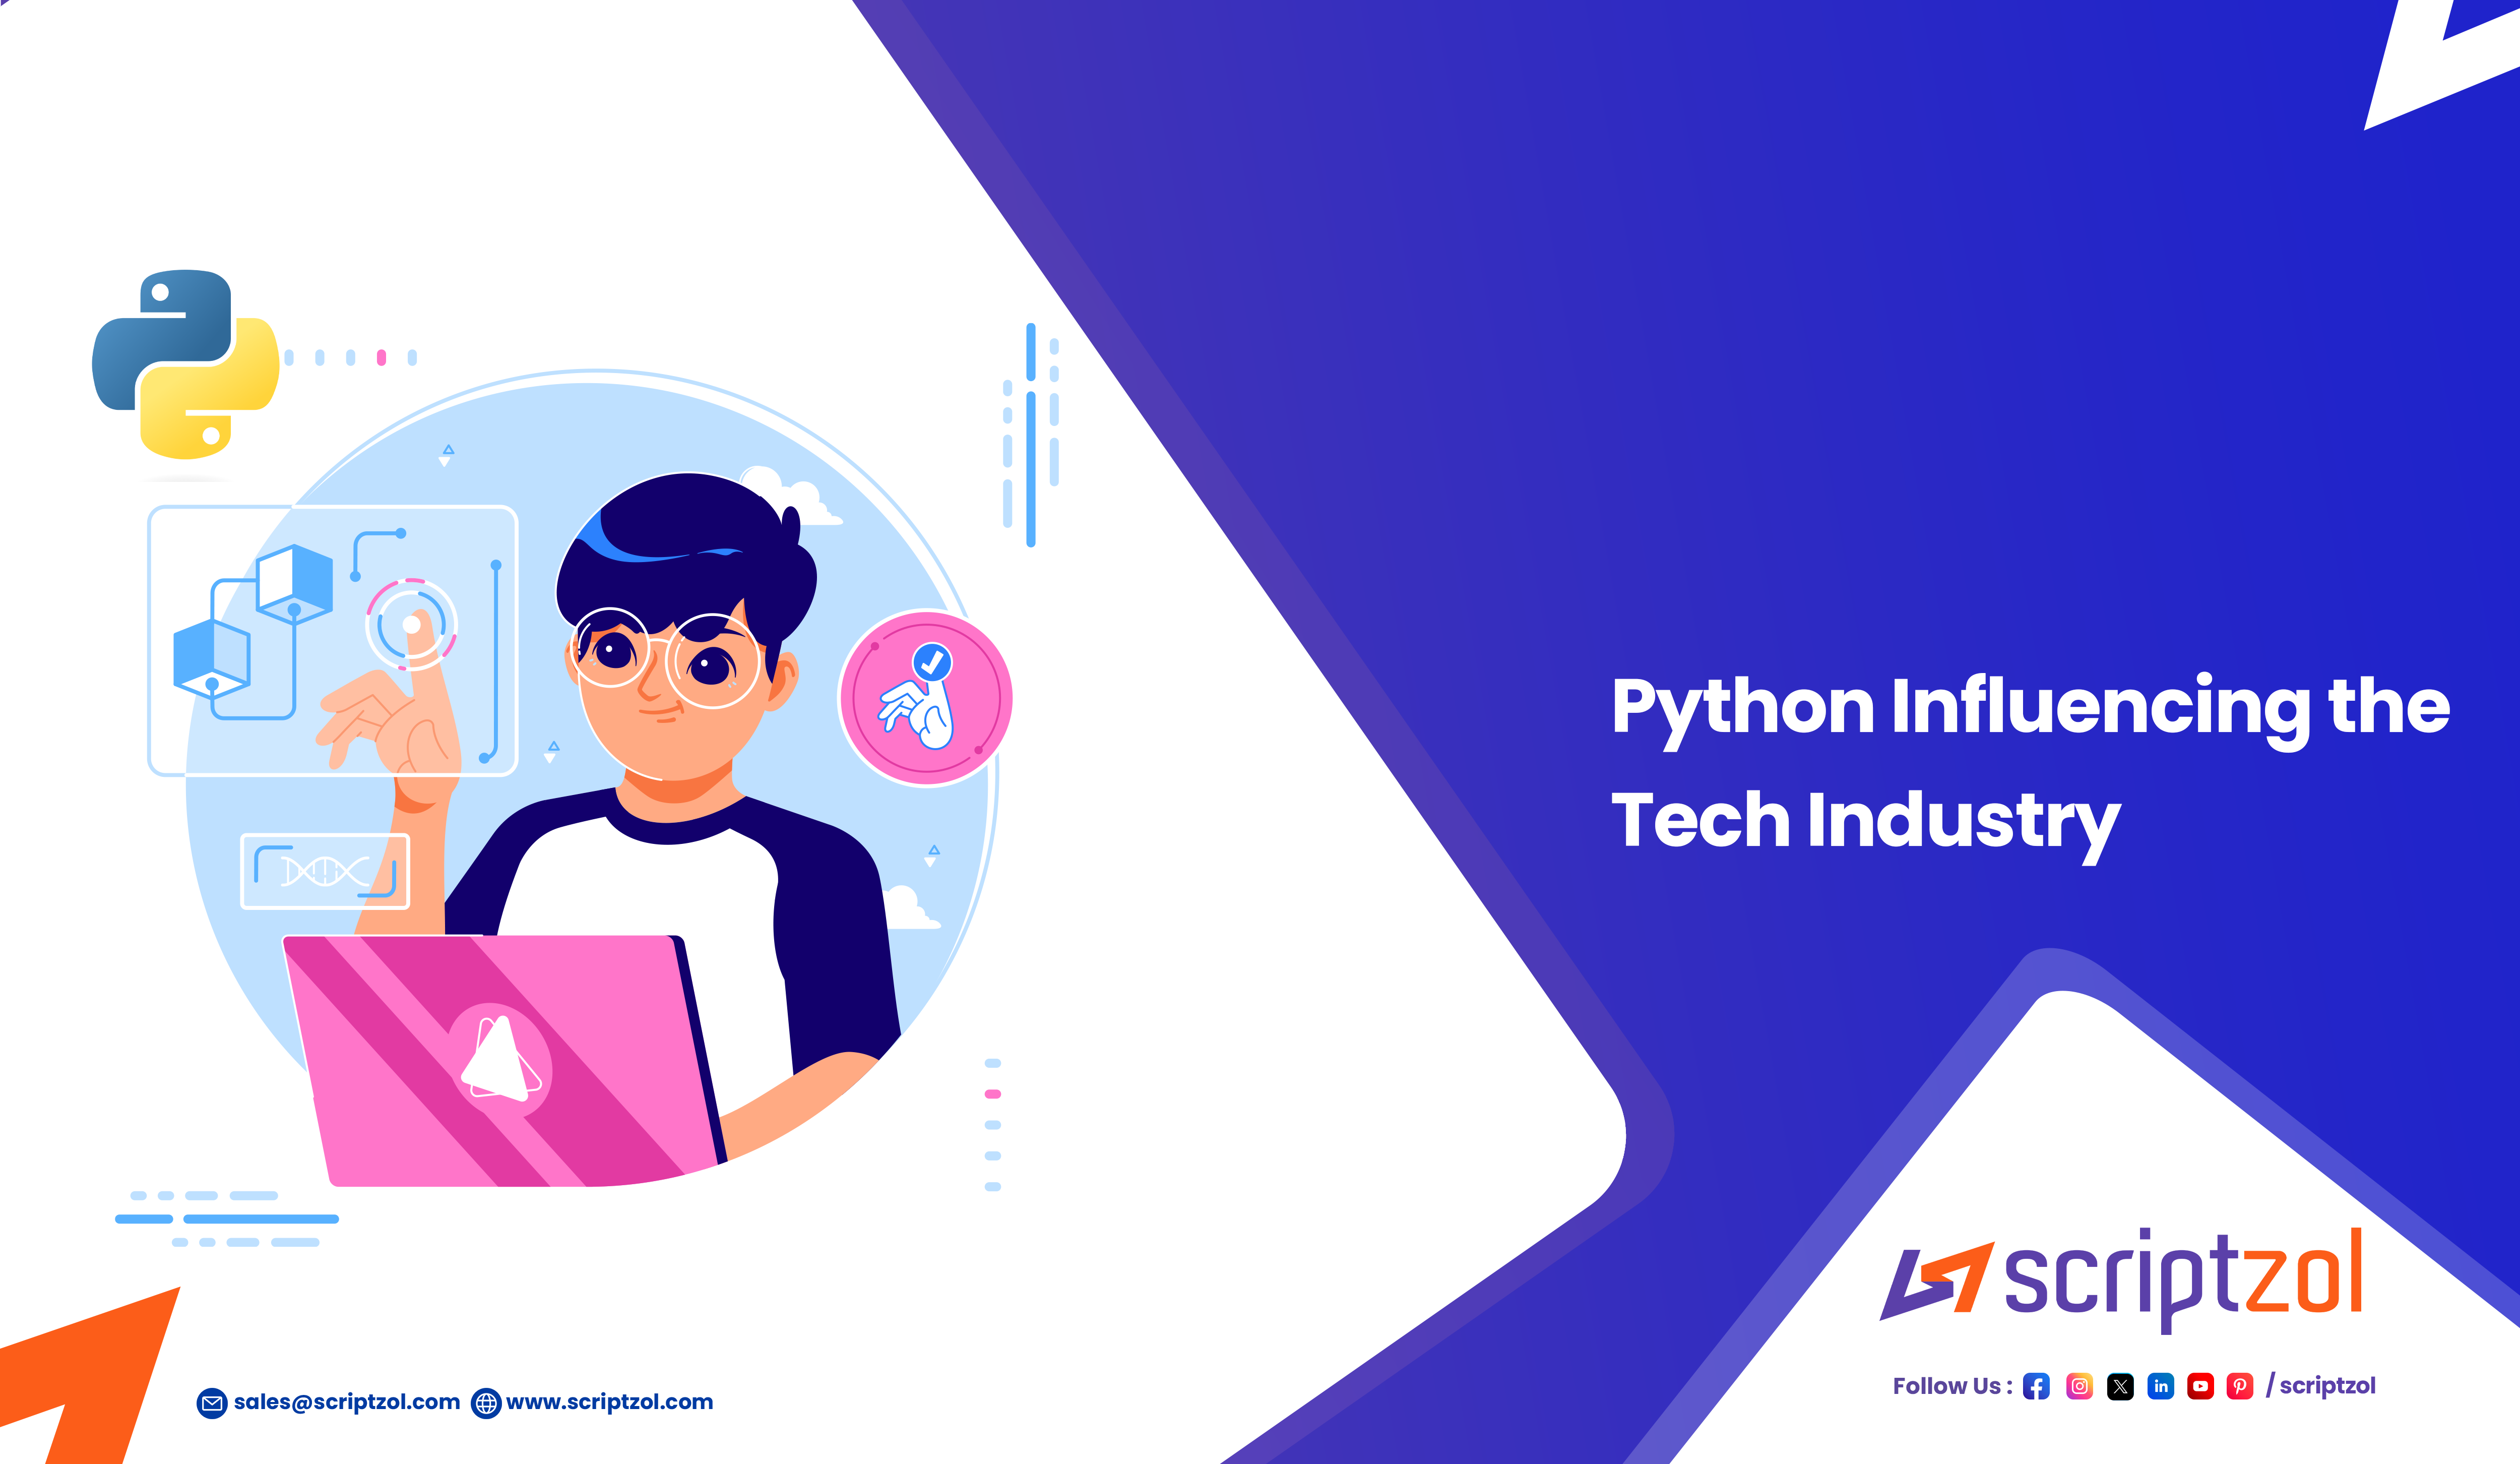 Python Influencing the Tech Industry